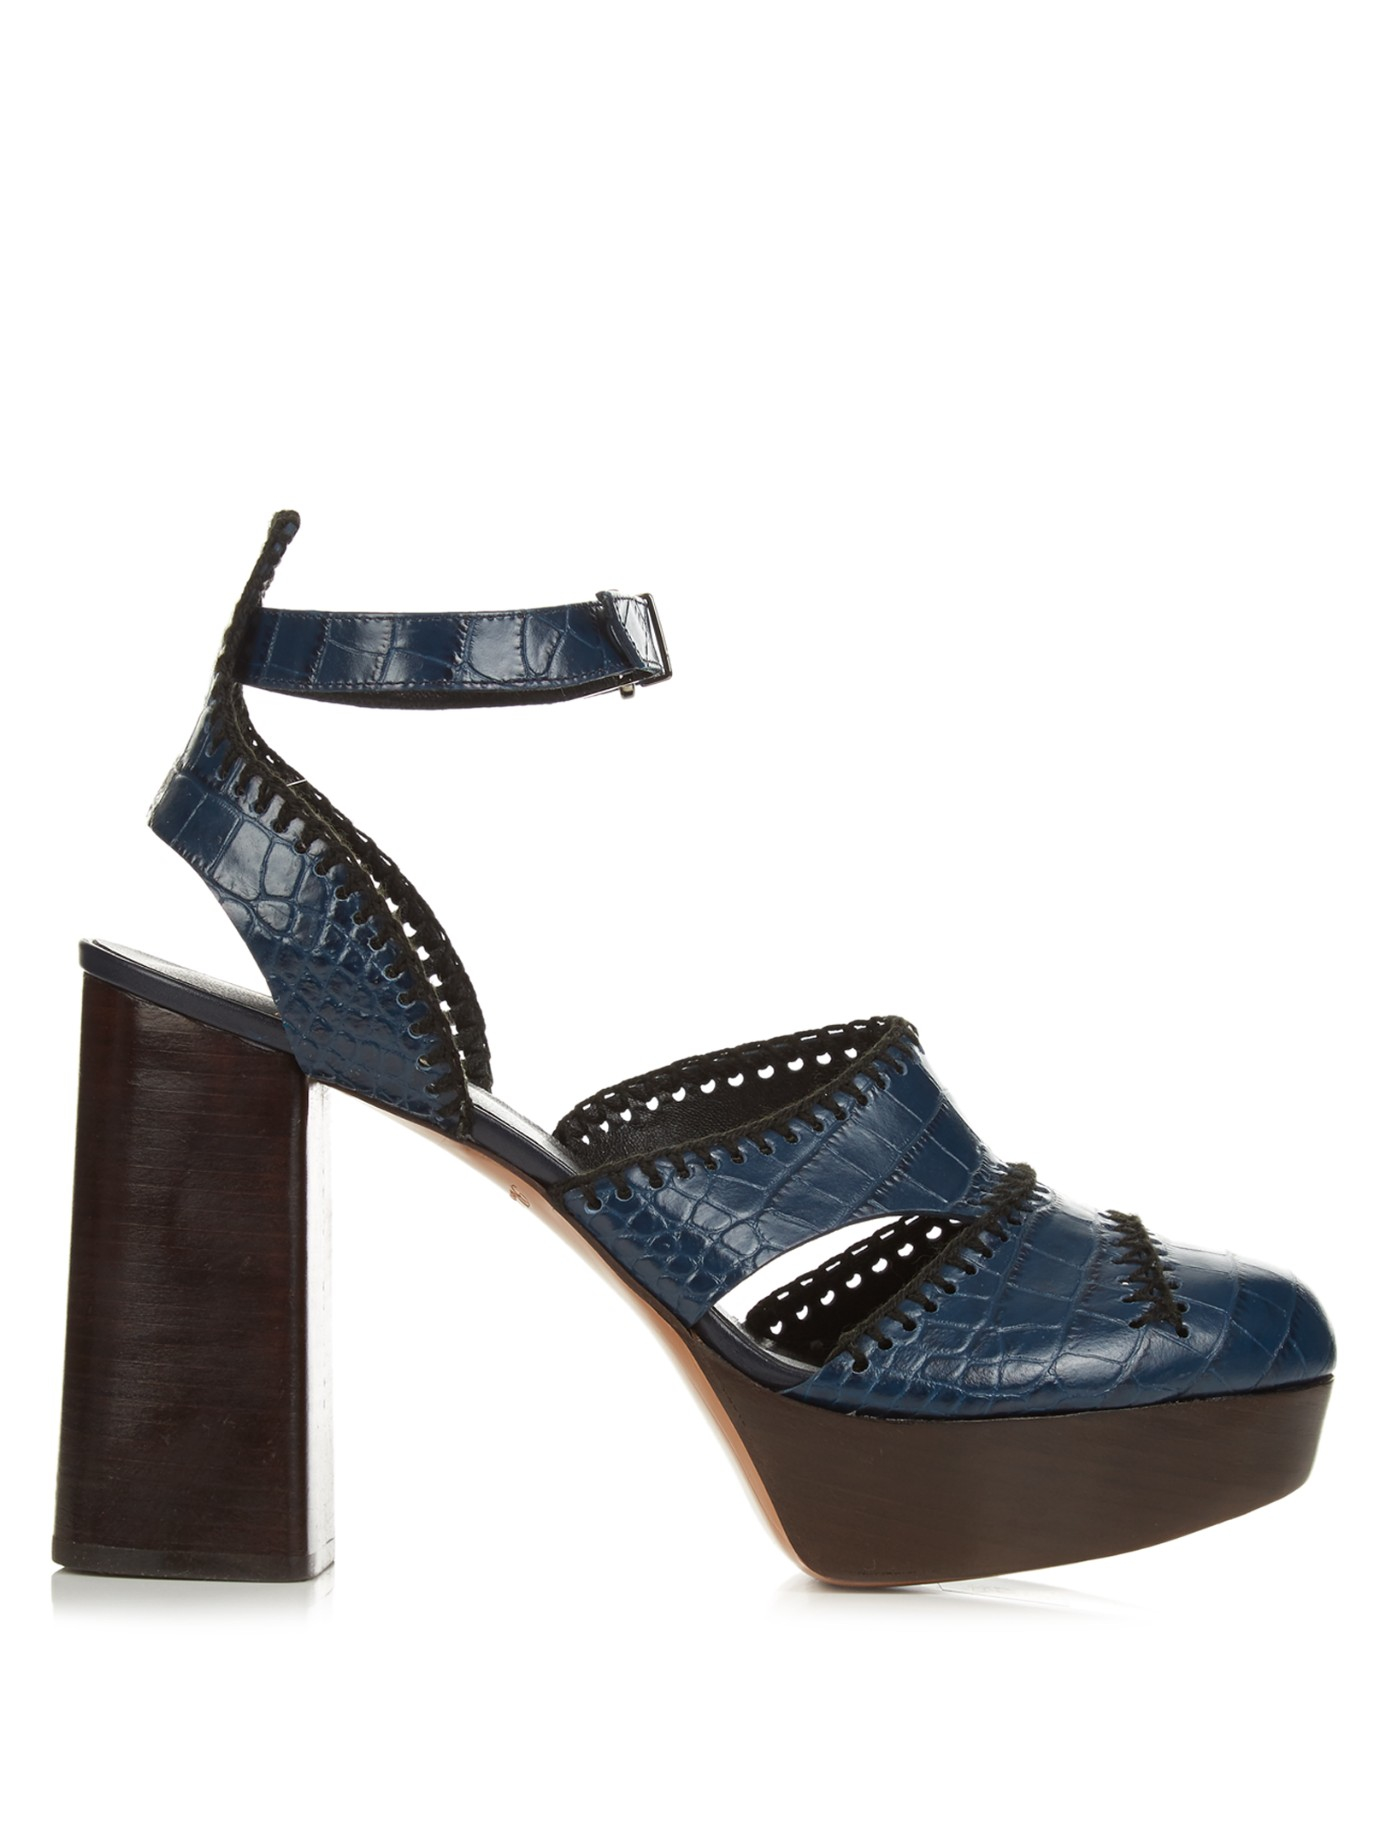 Lyst - Clergerie Holly Leather High-Platform Sandals in Blue